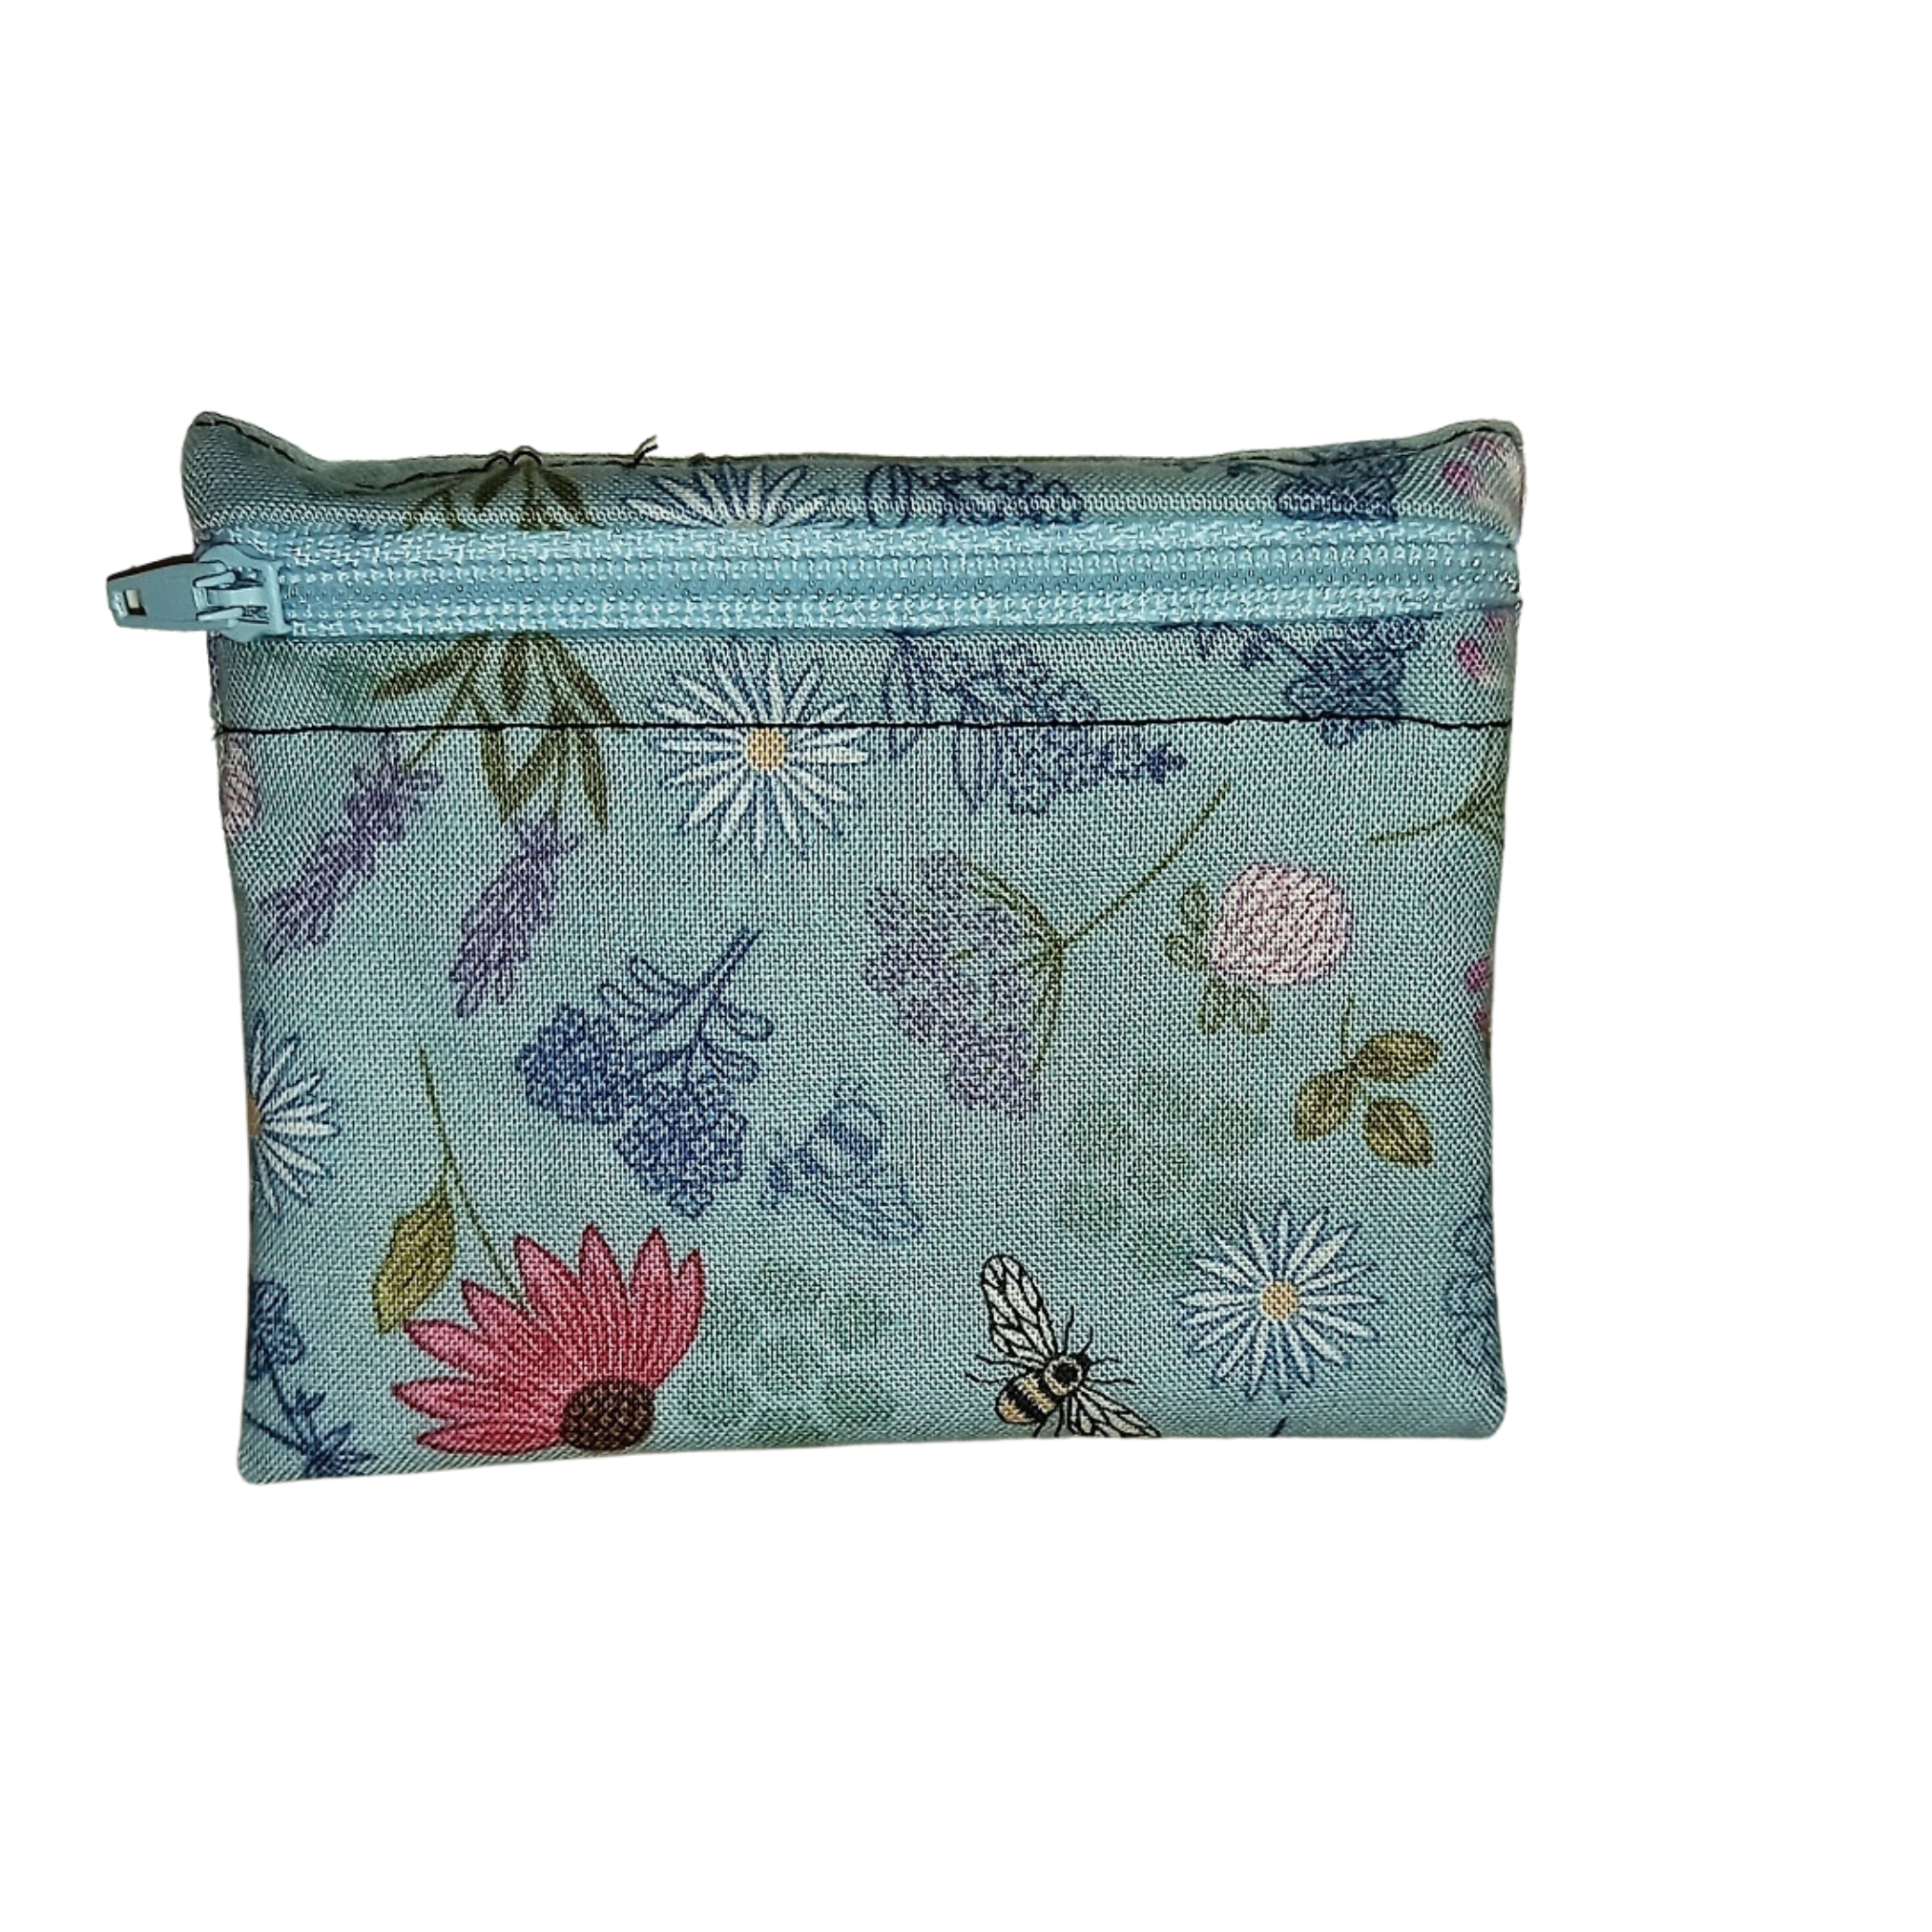 Floral Blue Bee Hive - Snack Bag - Small Pippins Waterproof Pouch for Food, Makeup and more, Eco-Friendly and Washable Lunch, Travel, and Storage